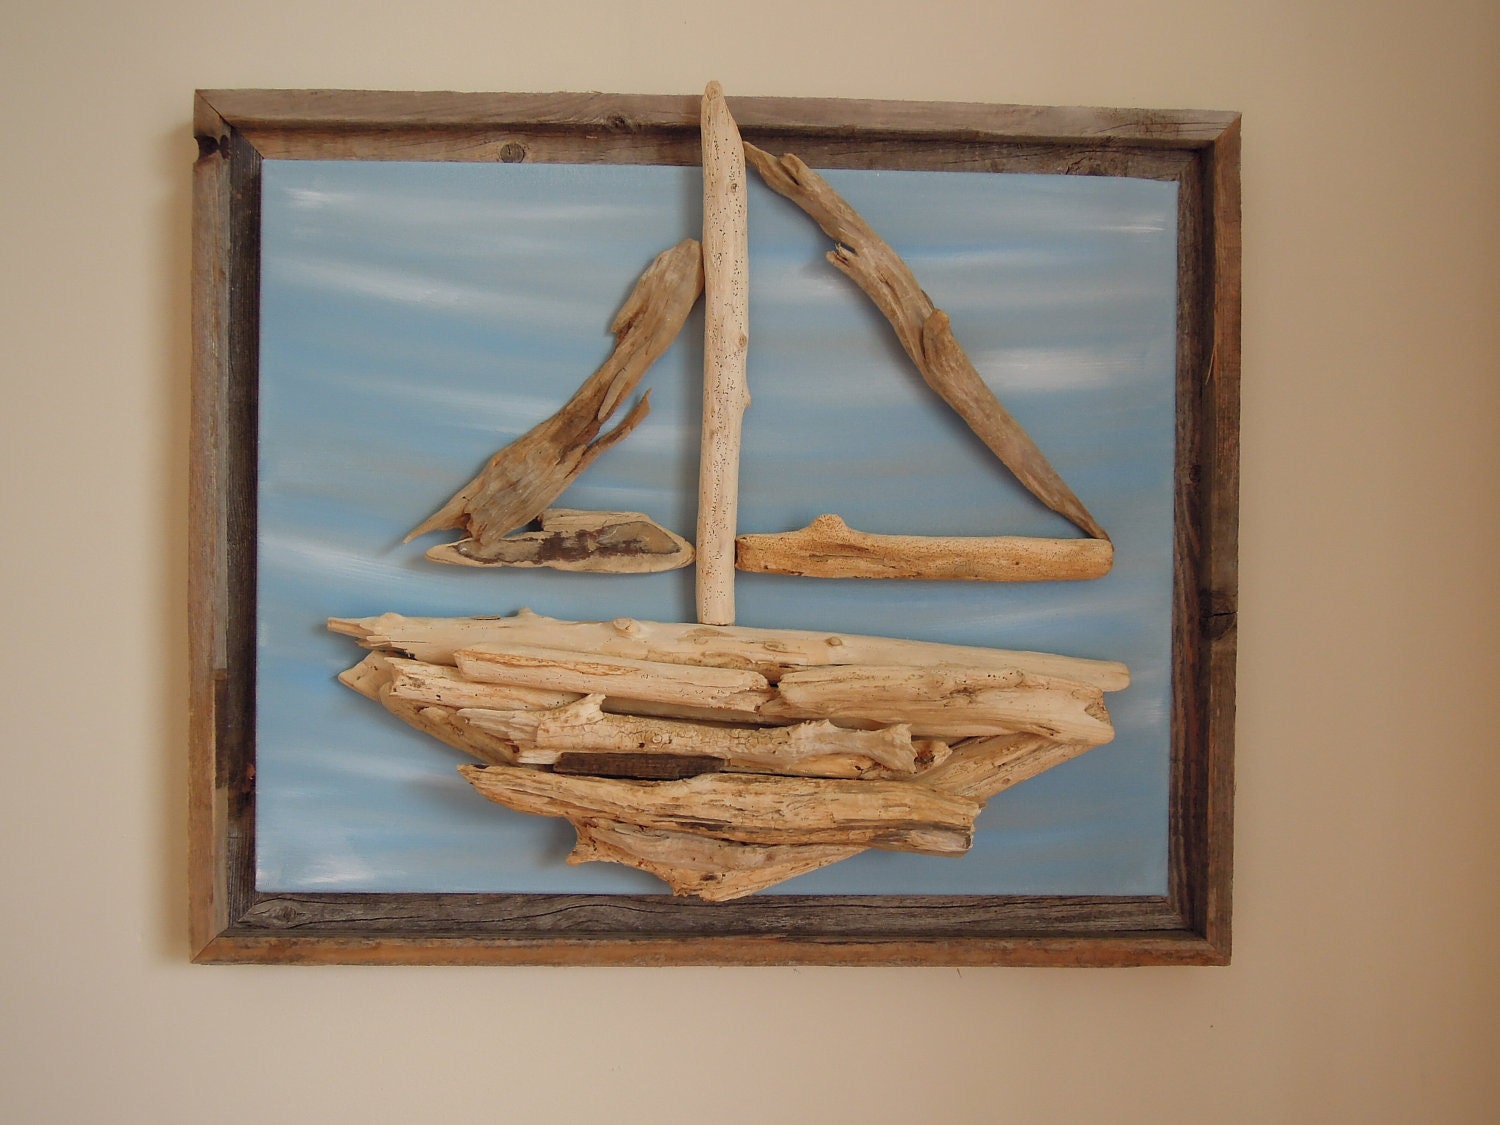 Driftwood Sailboat on  light blue and tan painted canvas with rustic frame 16x20 (19x23 with frame)